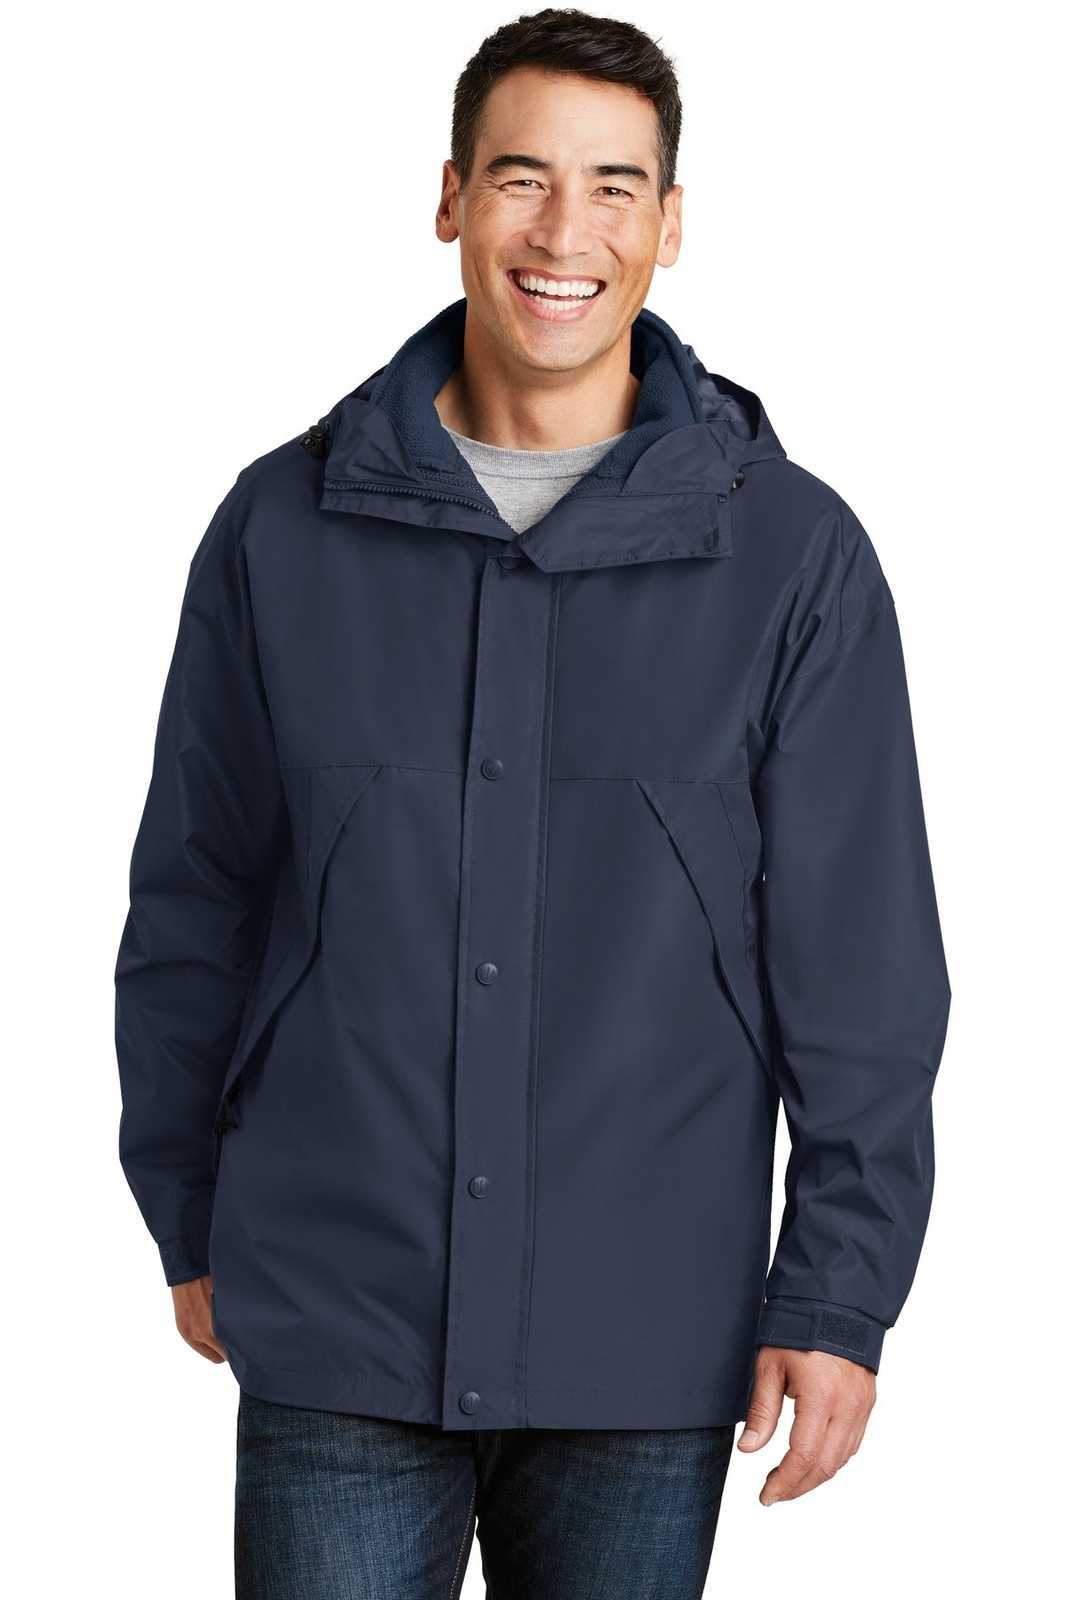 Port Authority J777 3-in-1 Jacket - Navy Navy - HIT a Double - 1